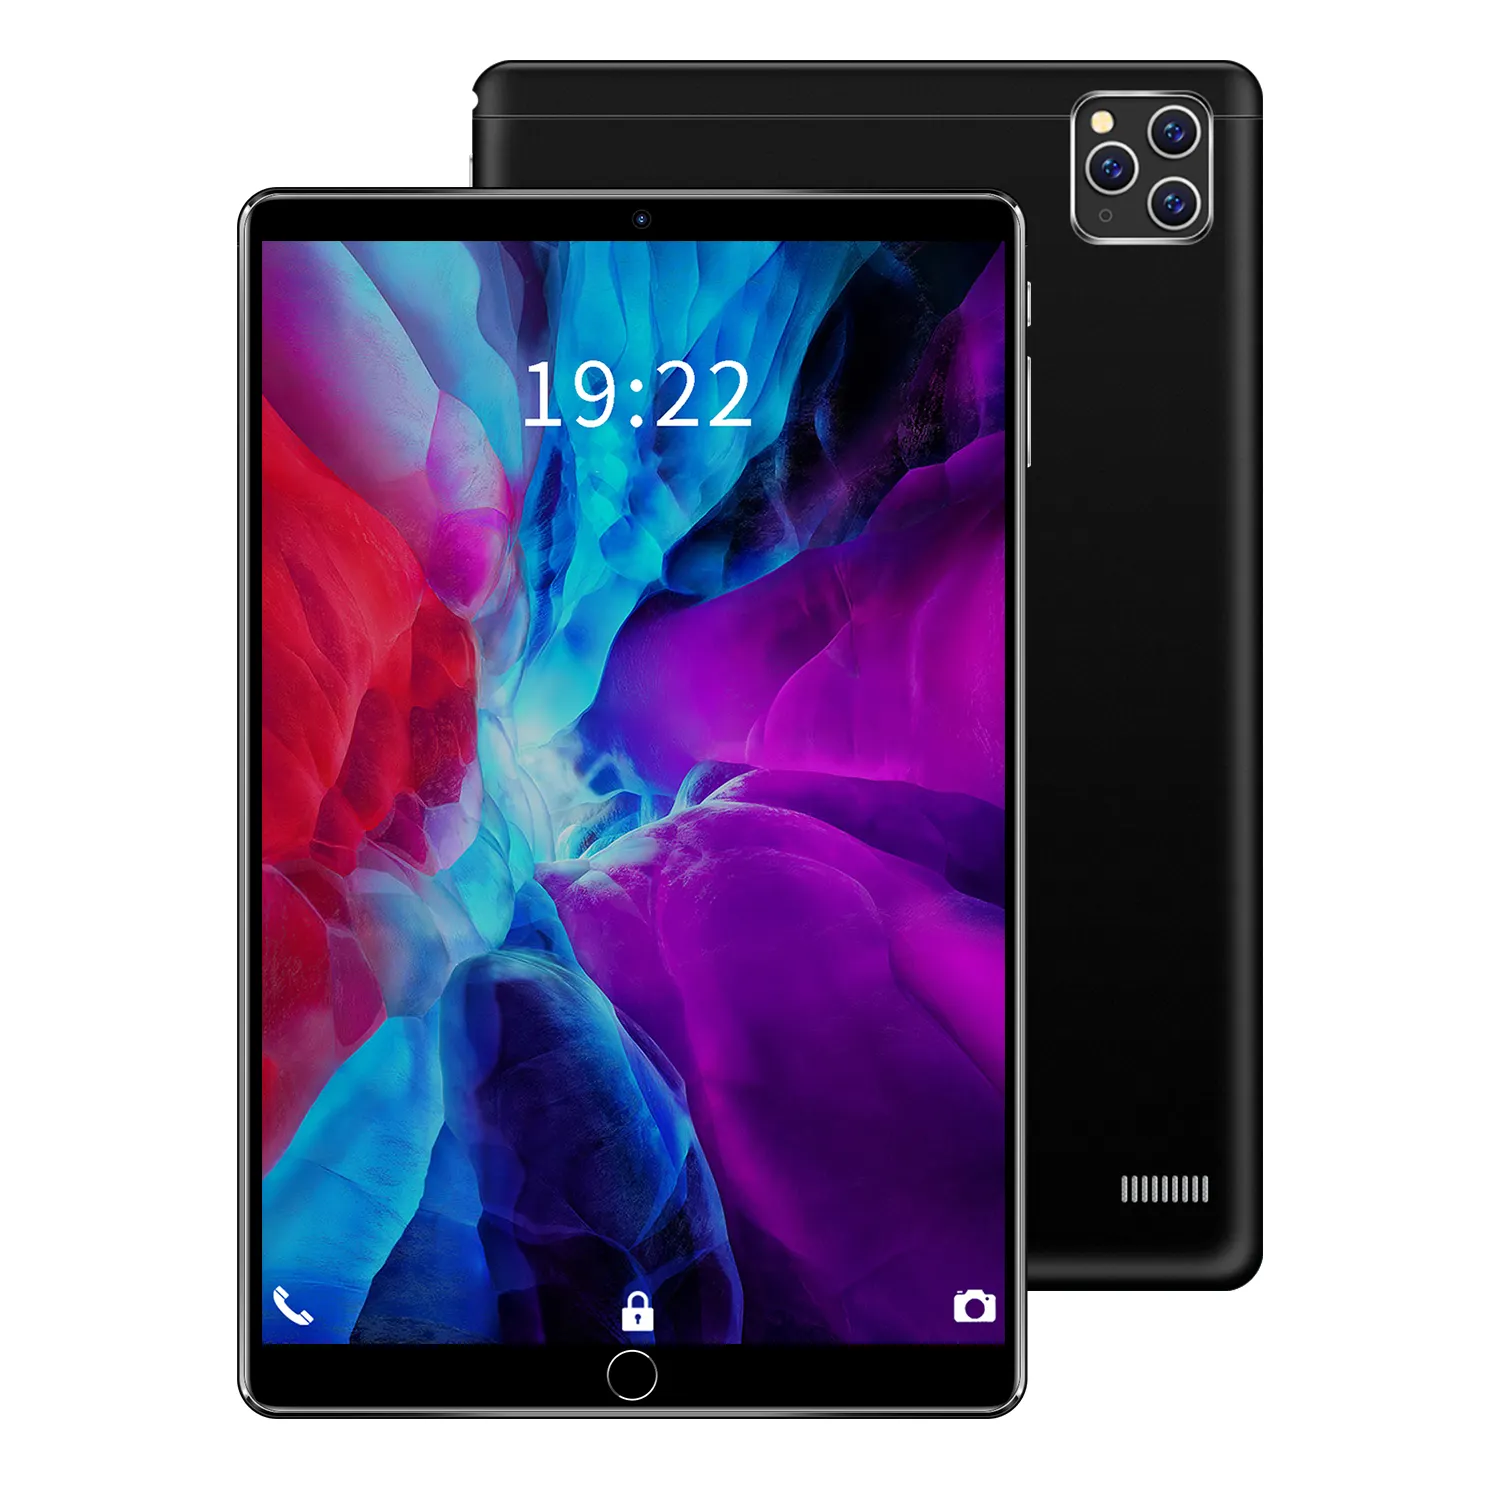 12GB+512GB New Tablet Computer 10.1 Inch Android Tablet PC Dual SIM Card Tablets